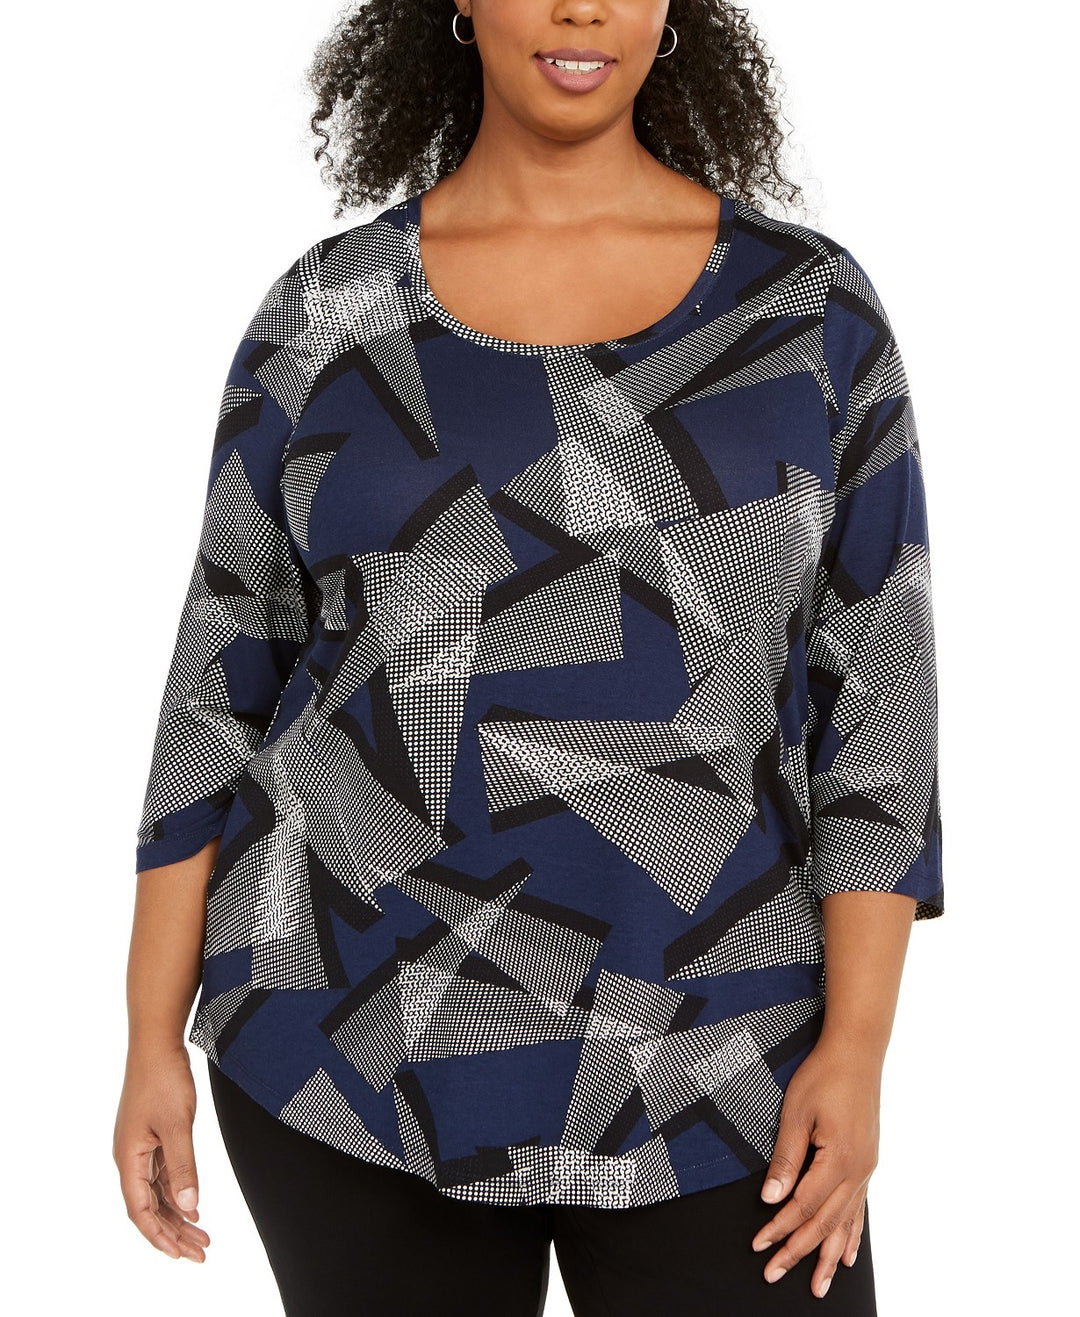 JM Collection Women's Plus Size Scoop-Neck Printed Top Blue Size Extra Large